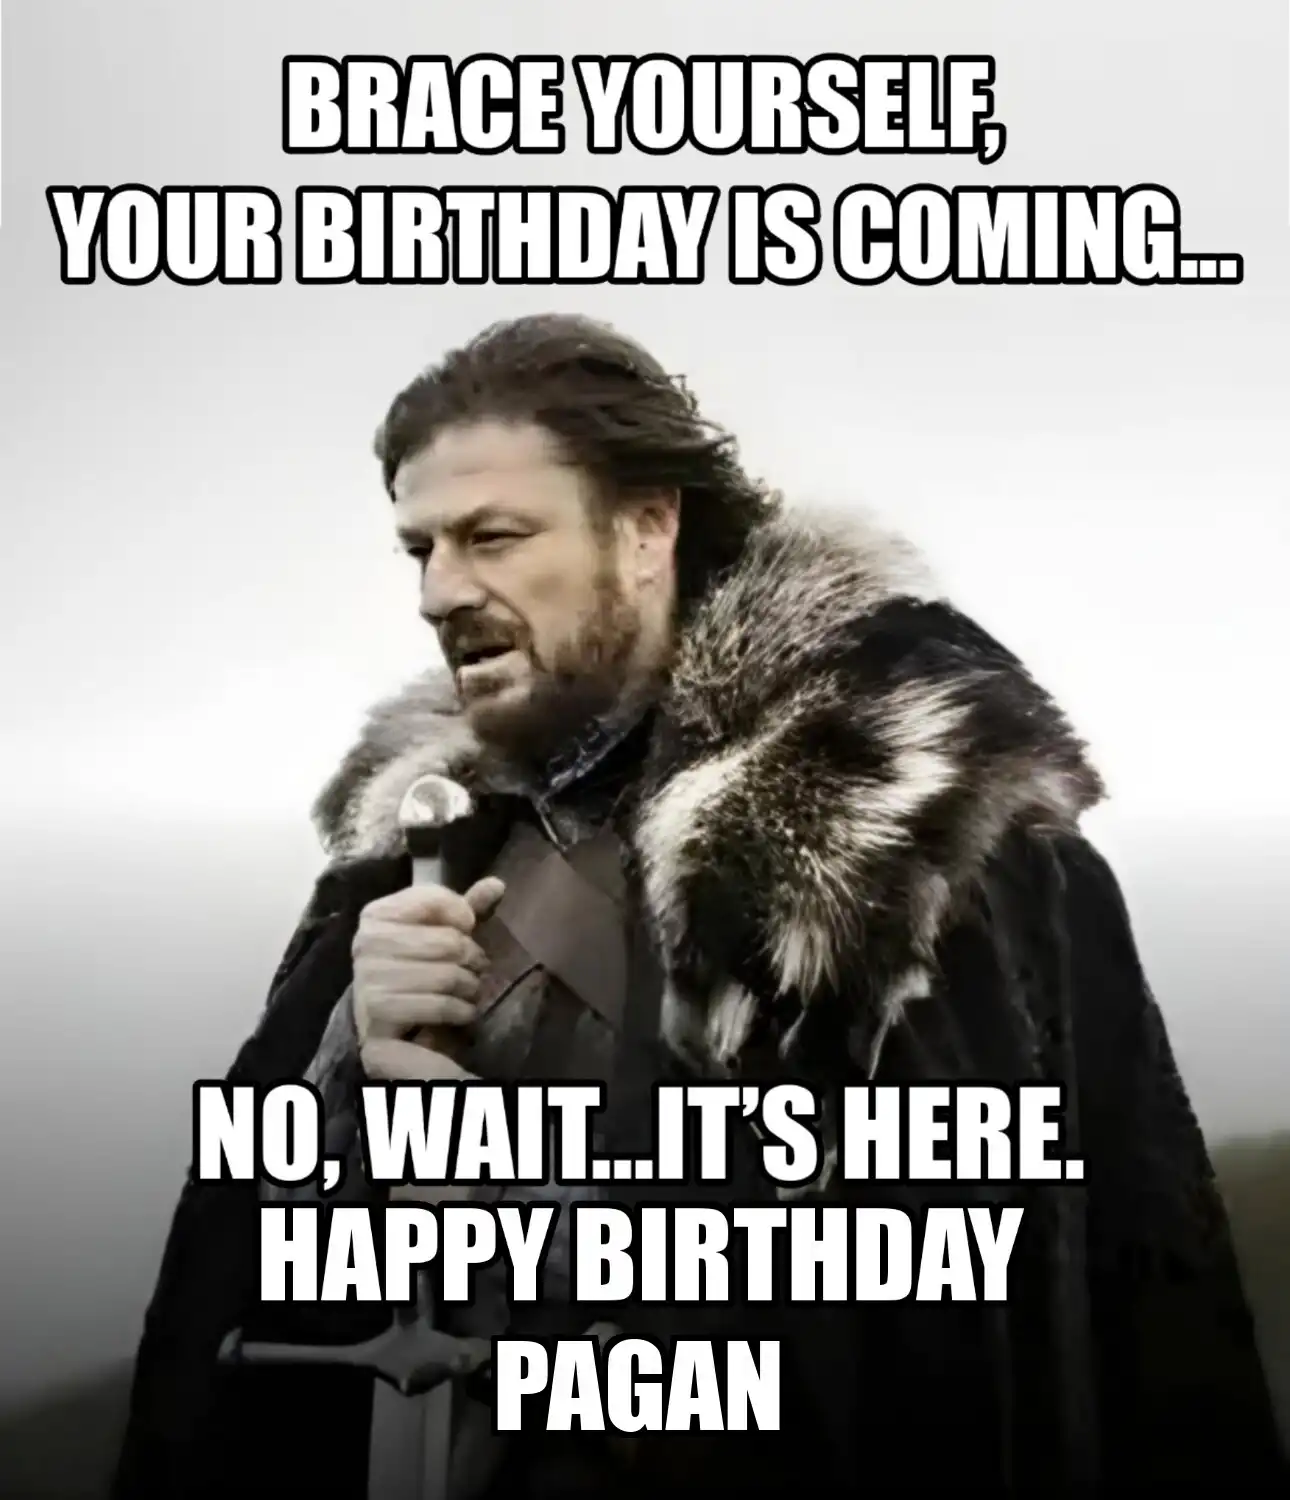 Happy Birthday Pagan Brace Yourself Your Birthday Is Coming Meme